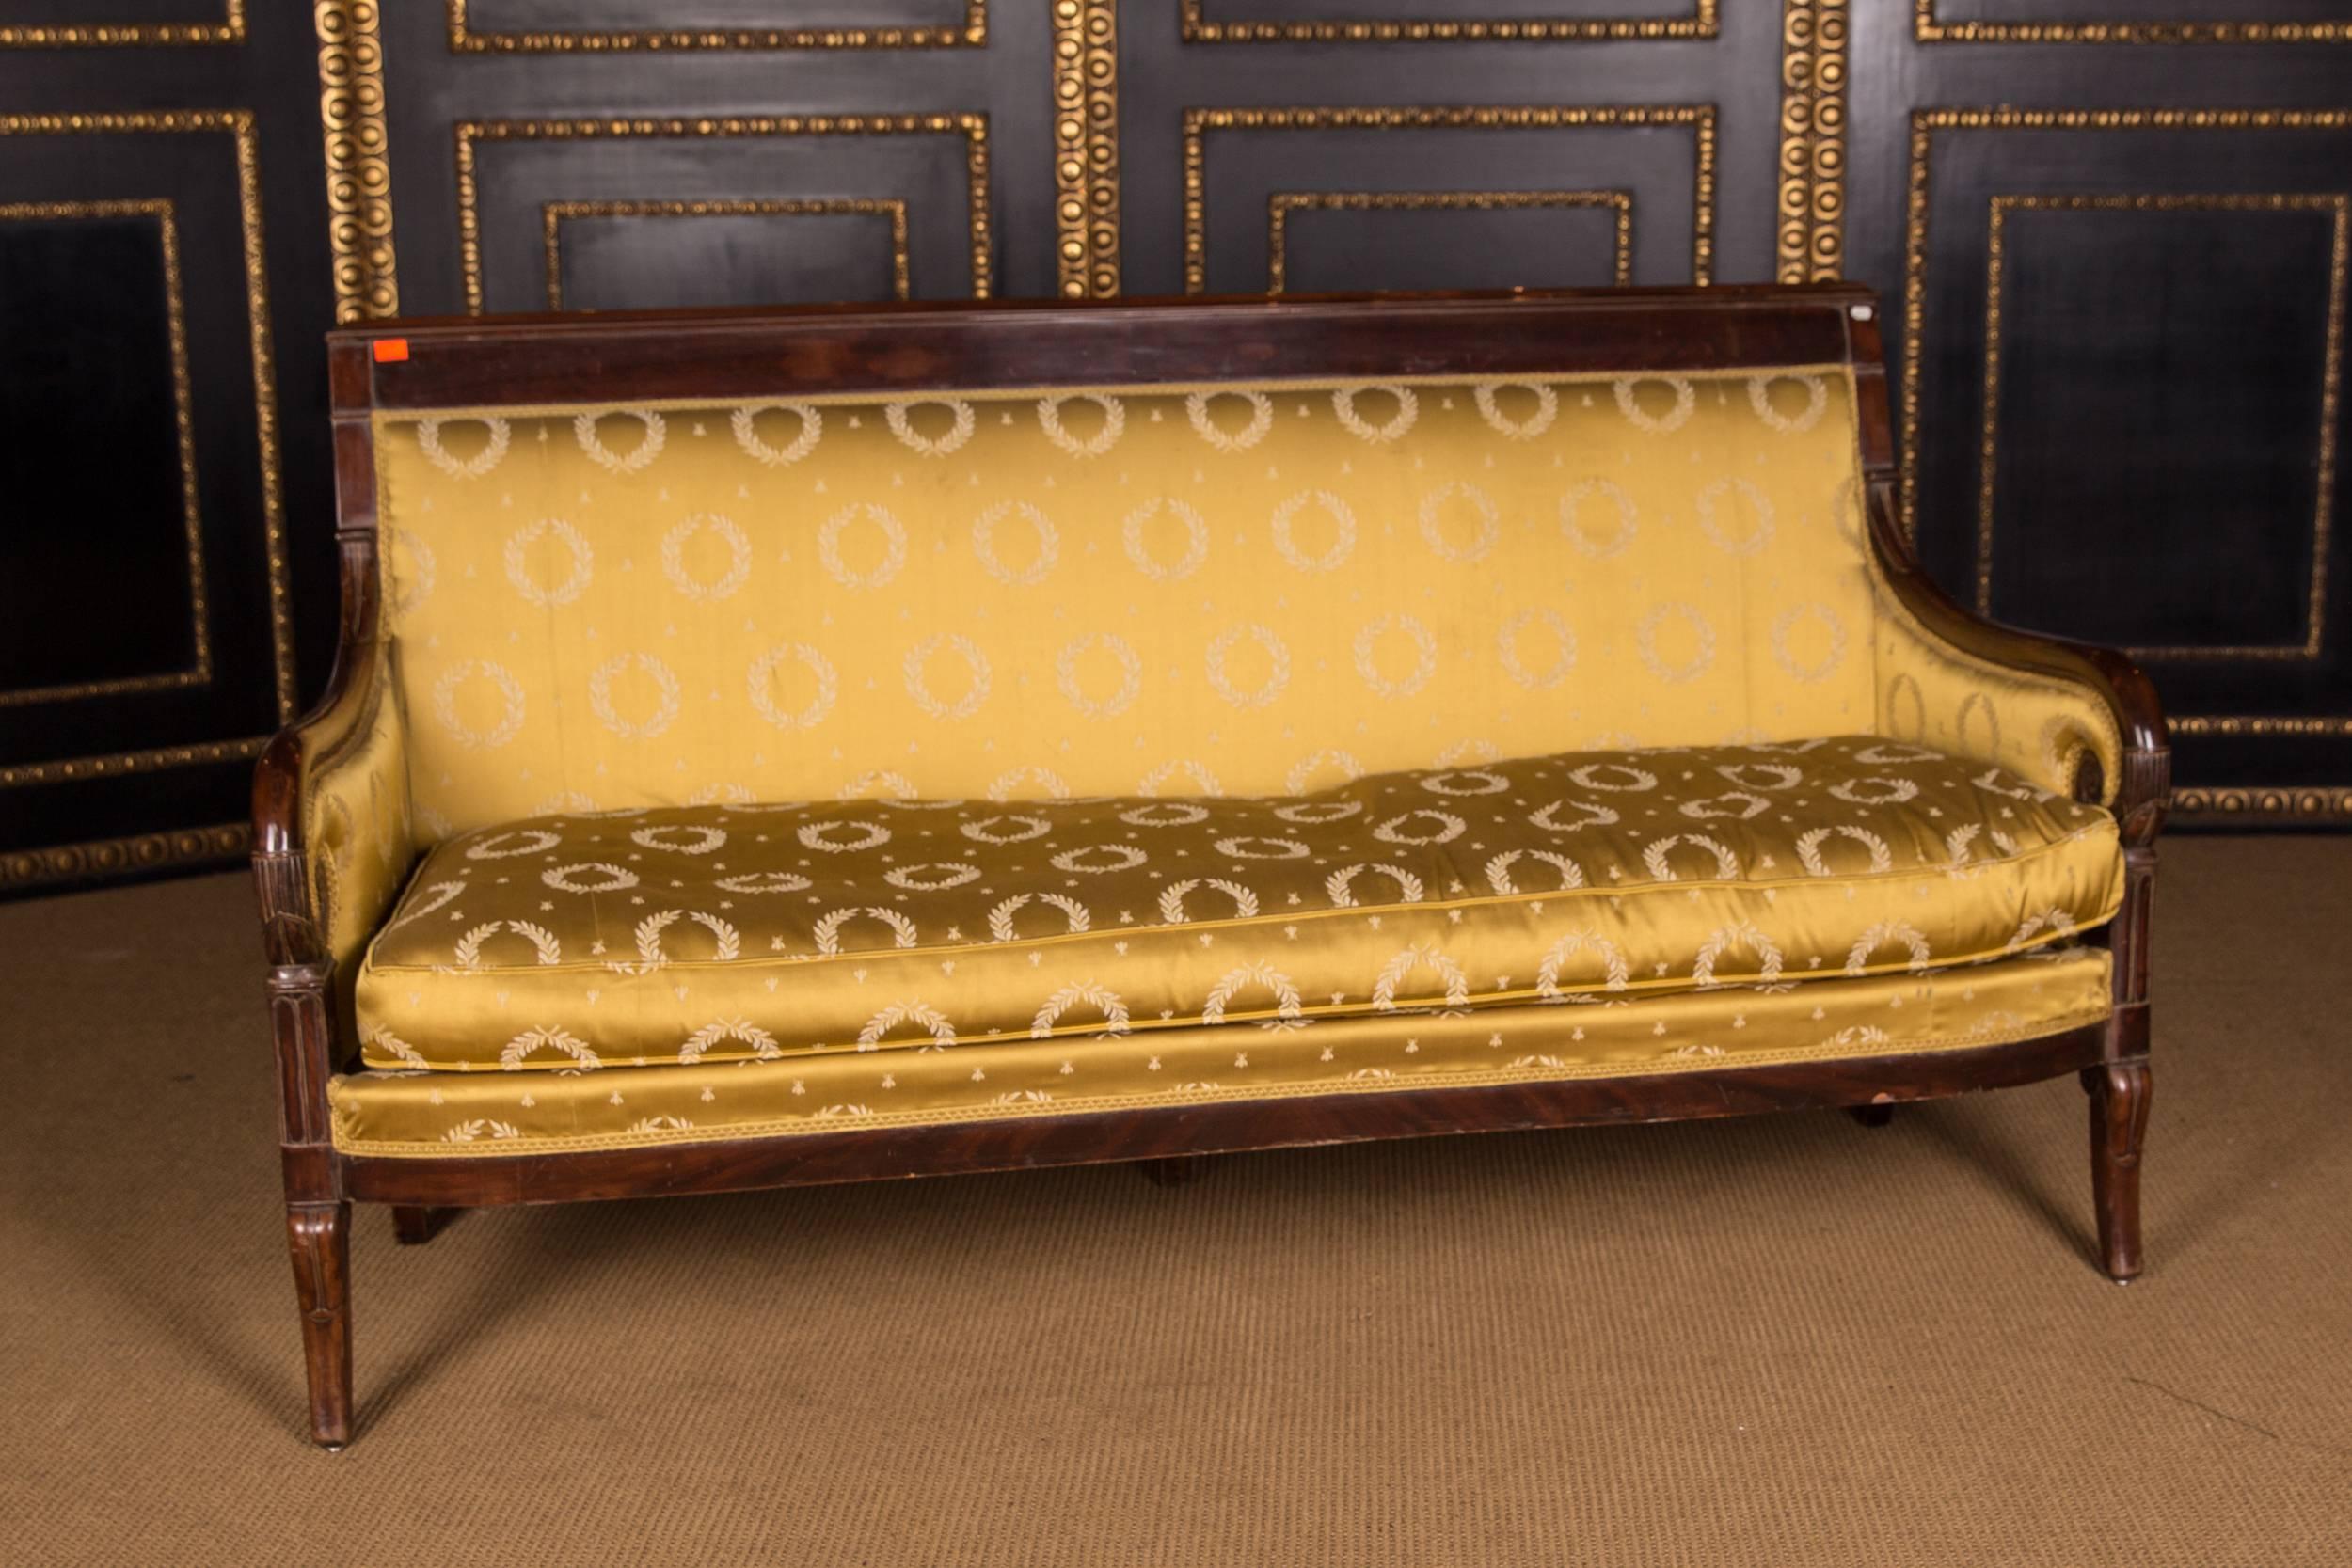 19th Century Original French Empire Sofa and Armchair Set Made from Mahogany (Französisch)